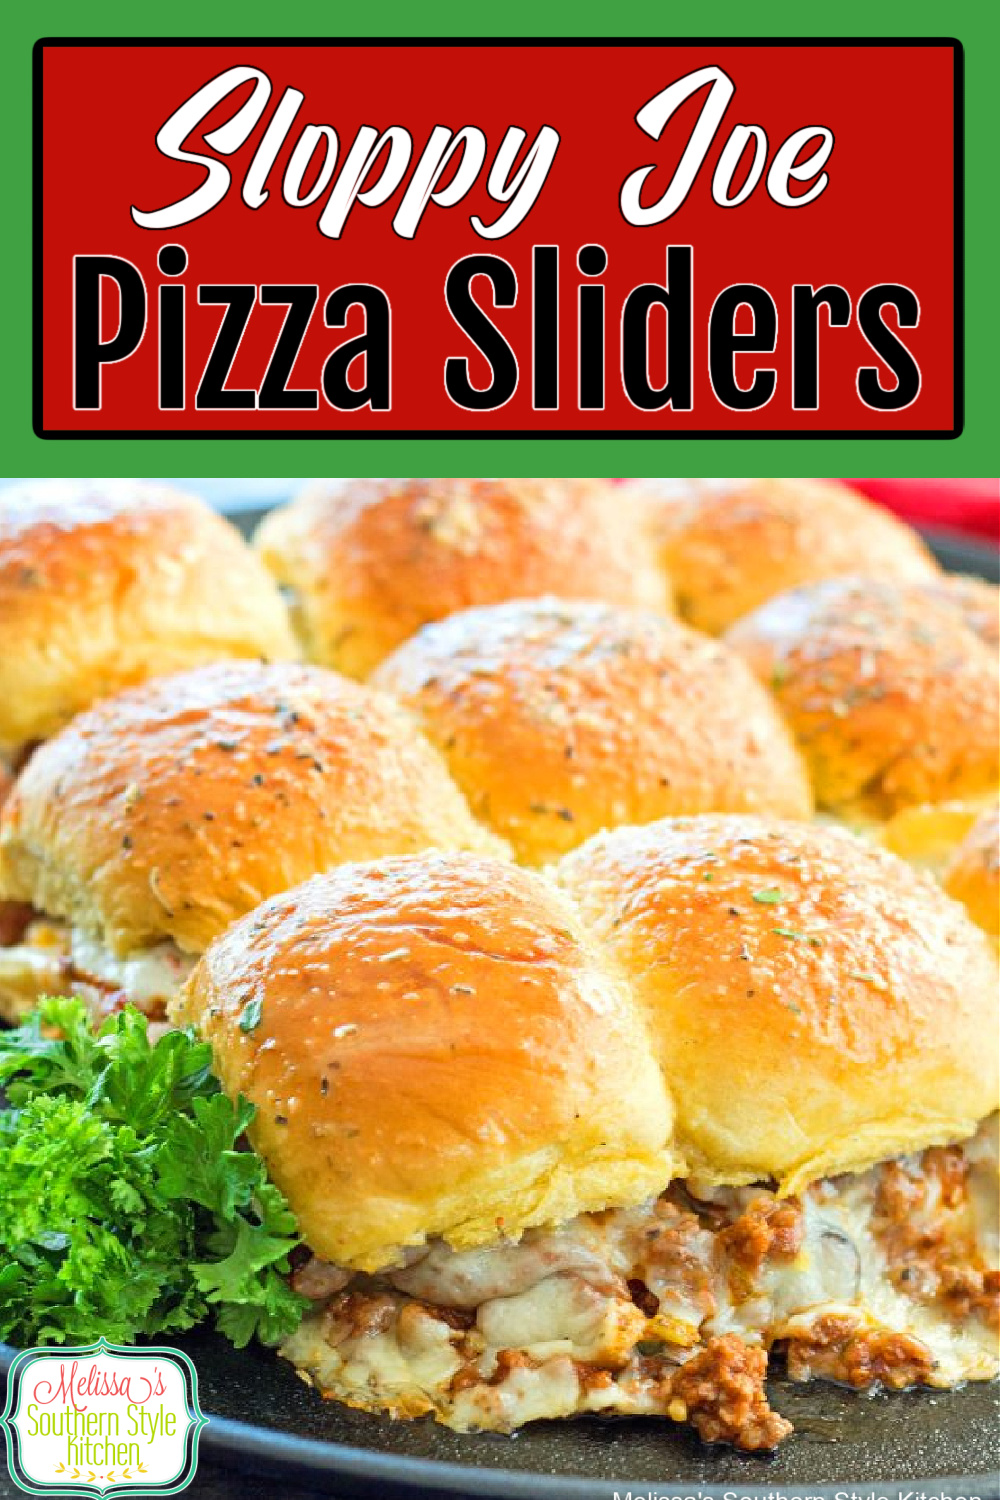 Enjoy these cheesy Sloppy Joe Pizza Sliders for snacking and casual meals #sloppyjoes #pizzasliders #pizza #sliders #easygroundbeefrecipes #groundbeef #groundbeefrecipes #pullapartrolls #pizzarecipes #appetizers #sandwiches #dinnerideas #food #recipes #southernfood #southernrecipes via @melissasssk